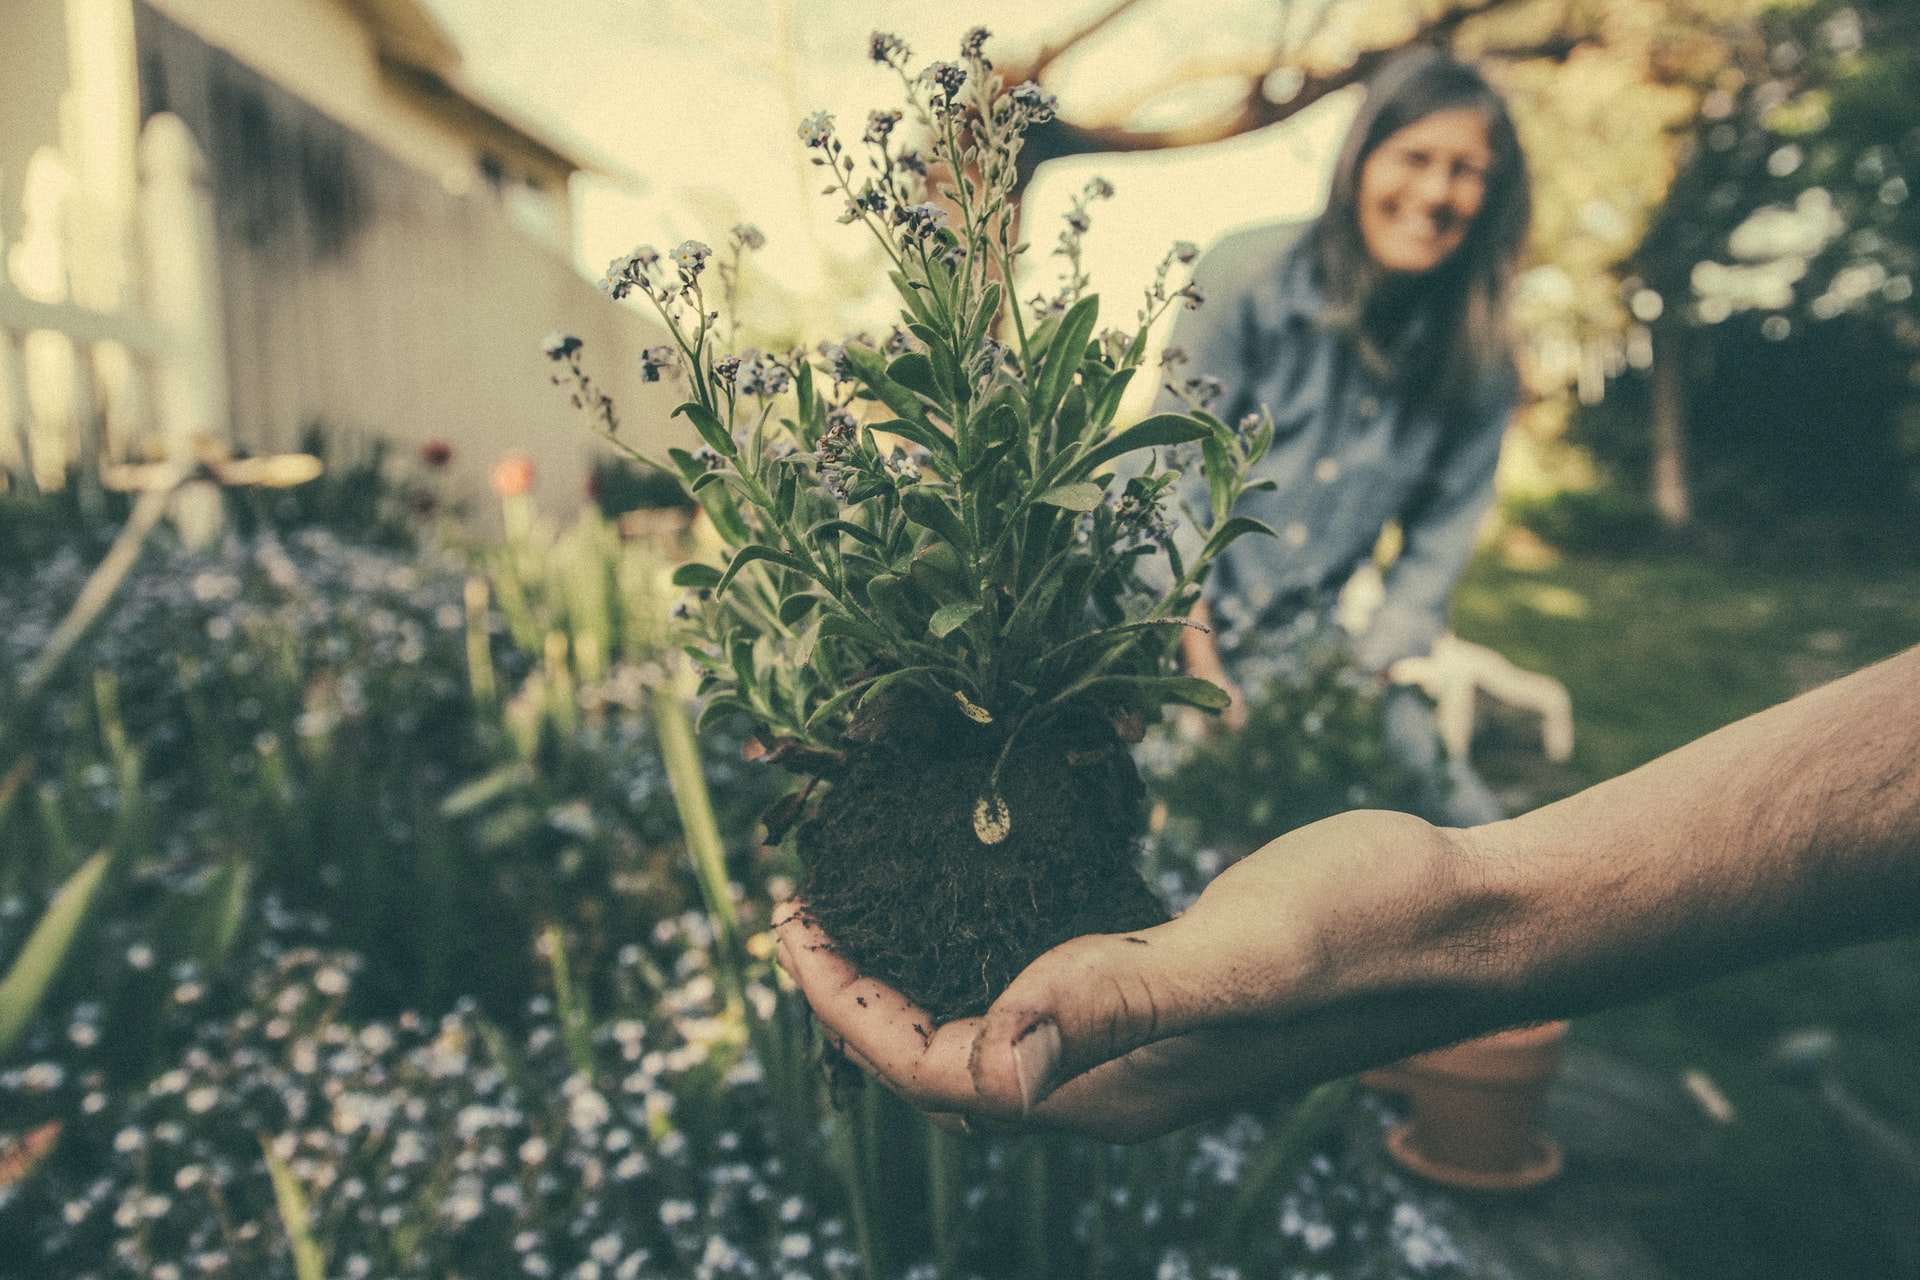 Gardening is good for wellbeing